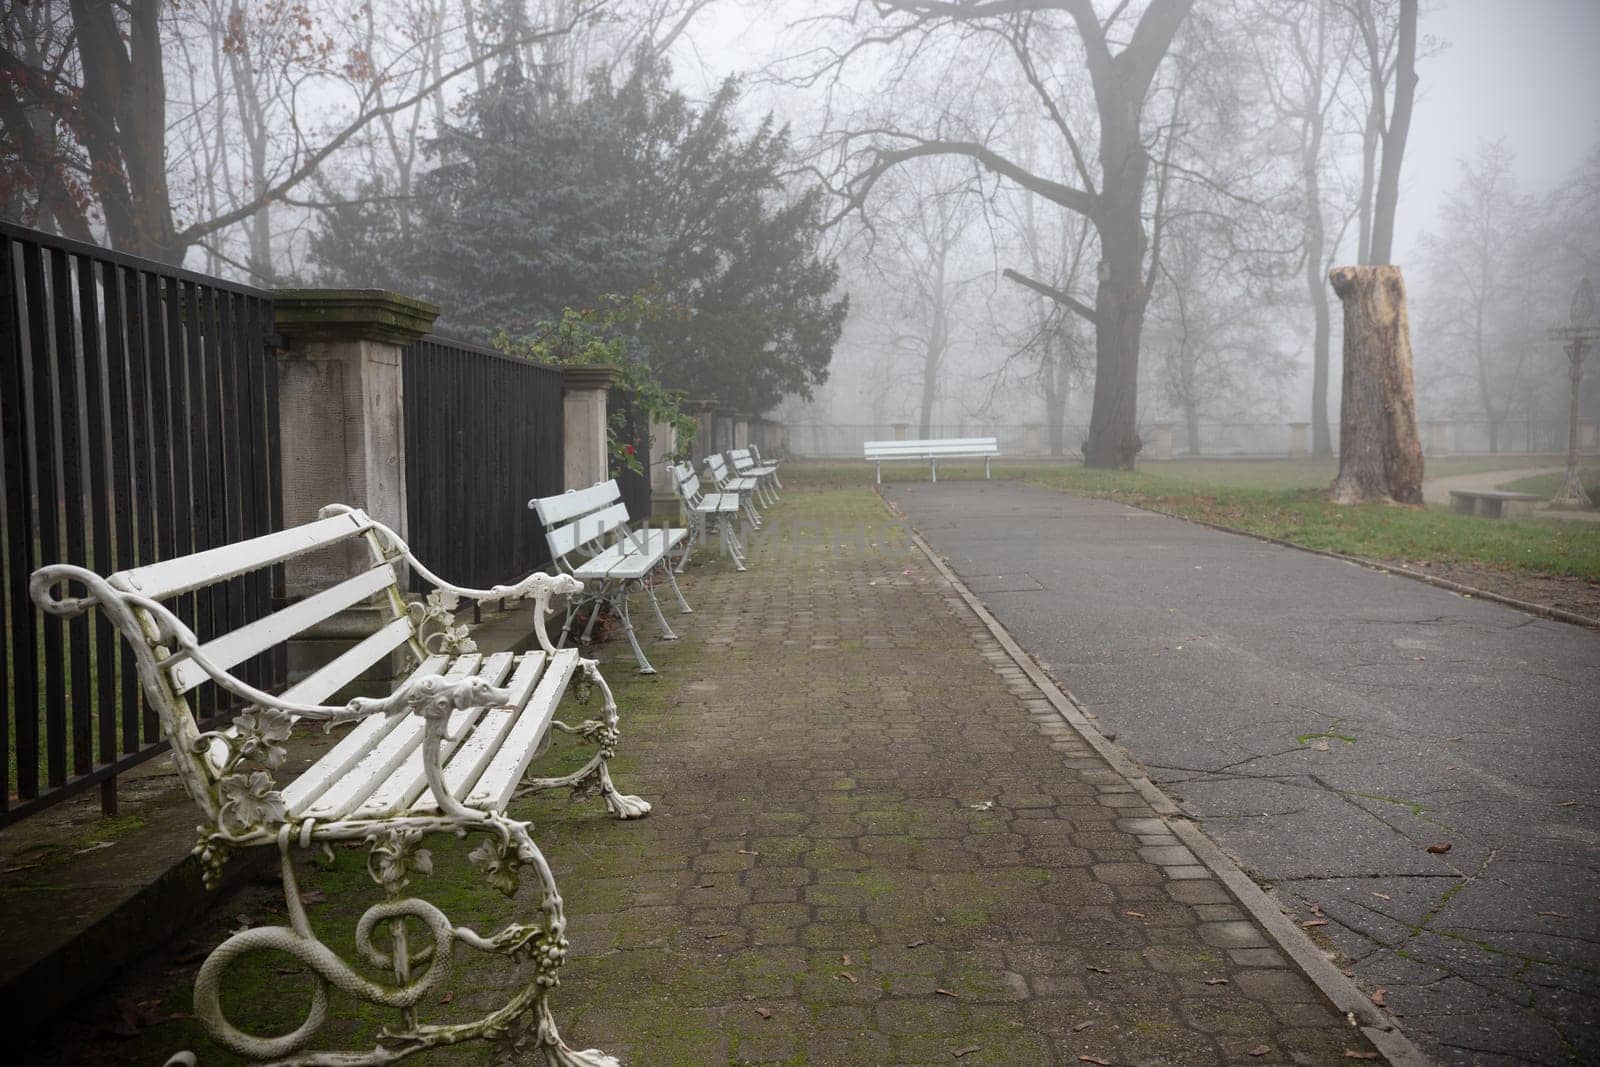 A bench in a calm park setting - misty autumn background by Studia72